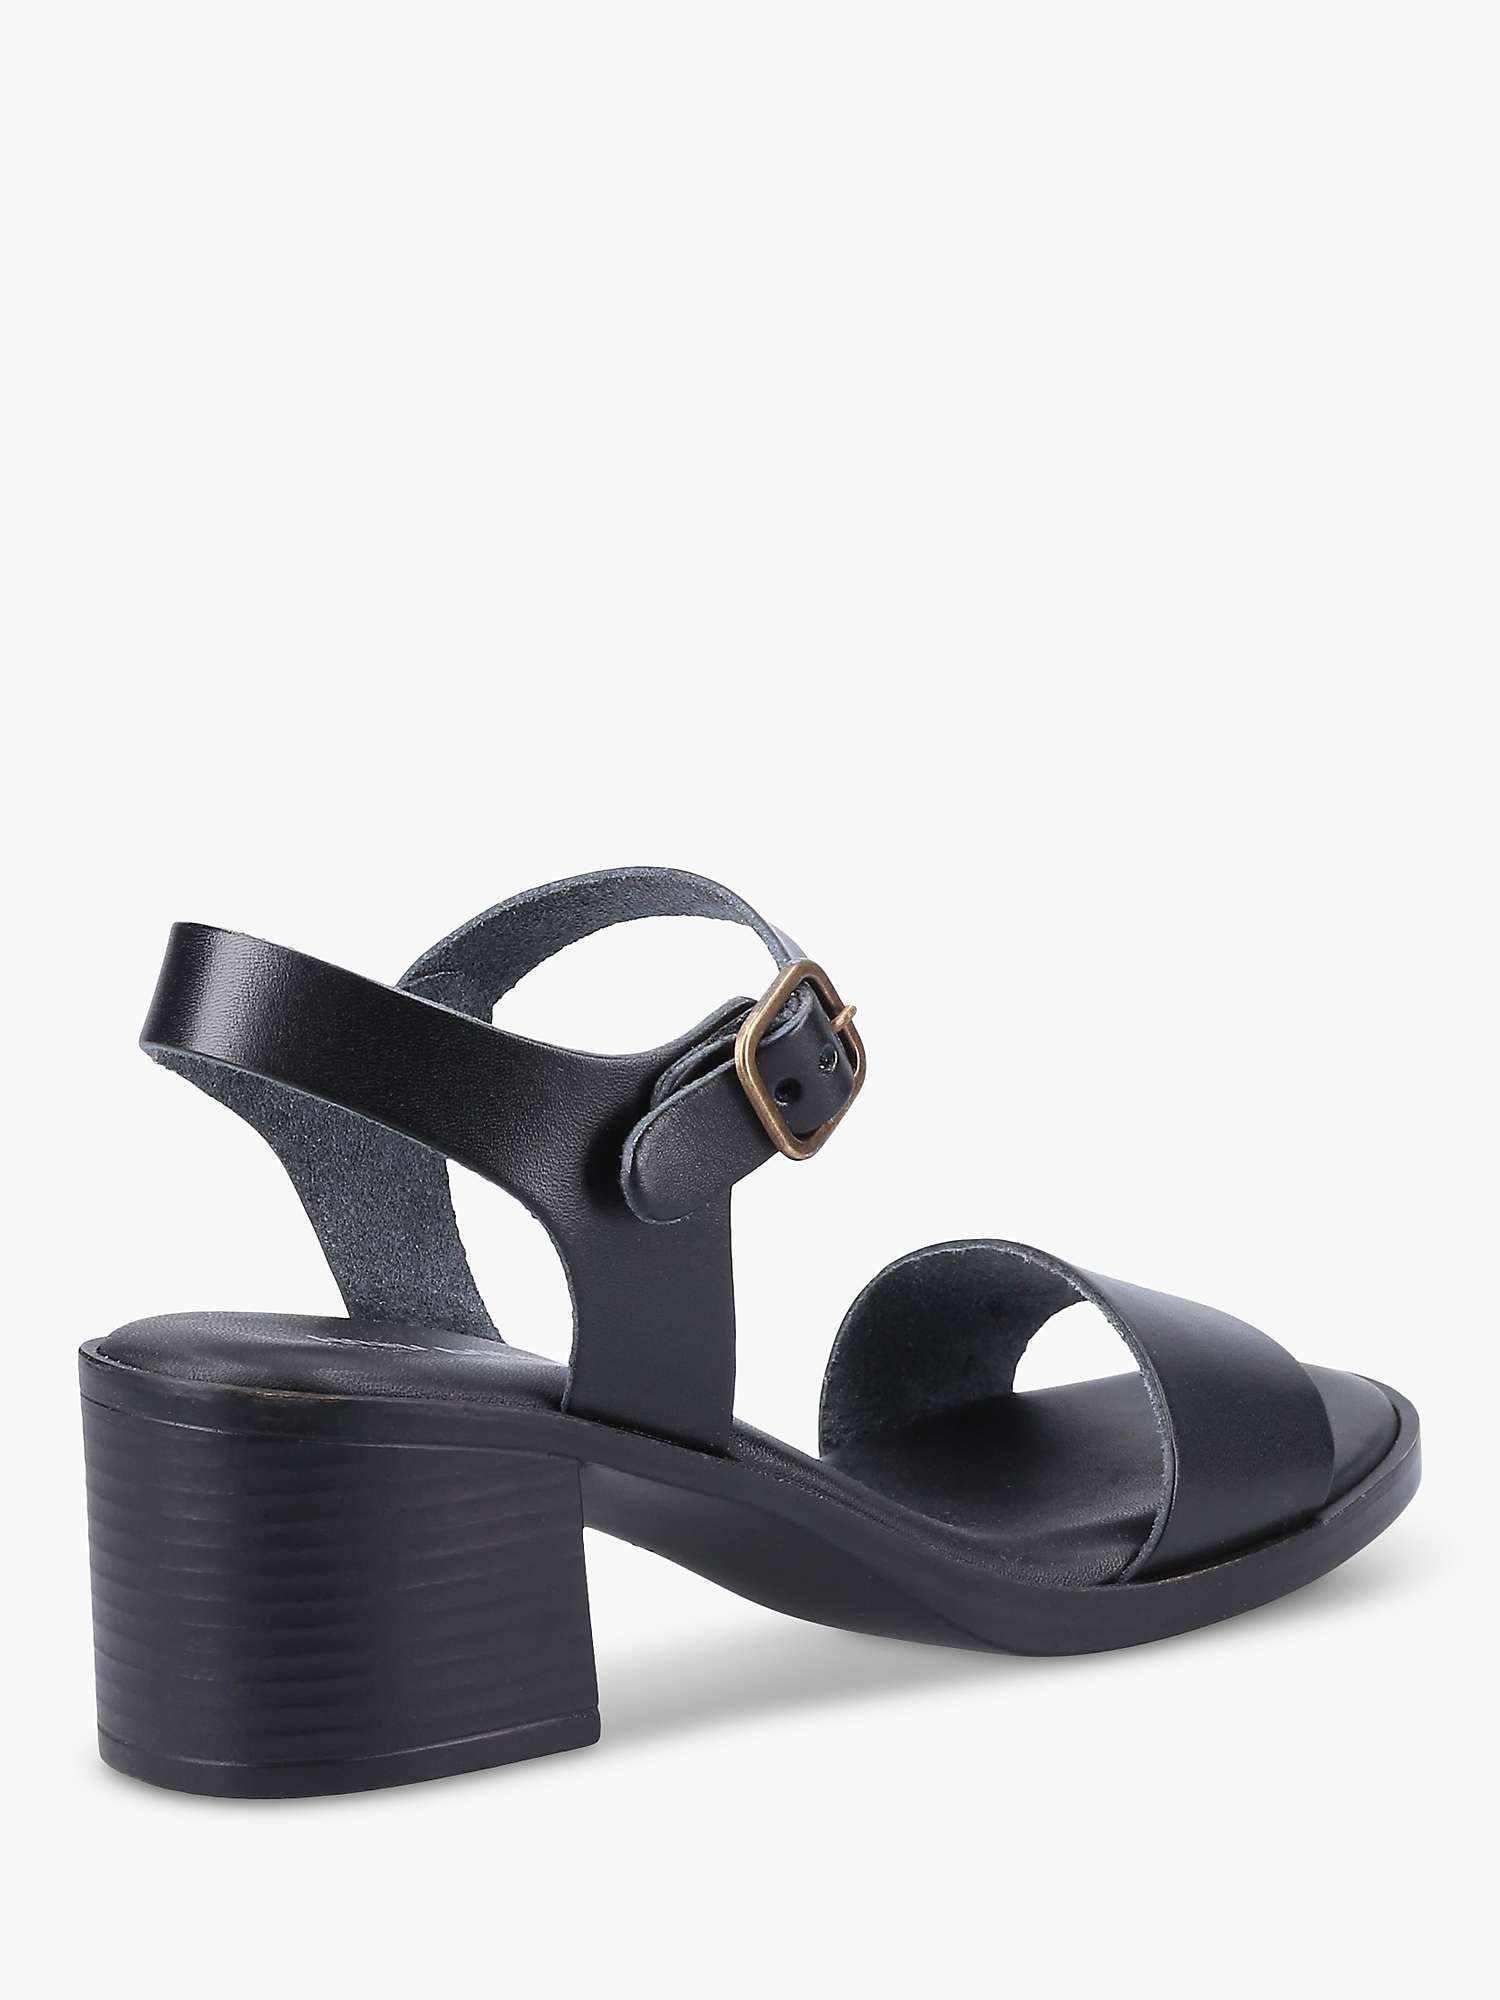 Buy Hush Puppies Gabby Two Part Buckle Sandal, Black Online at johnlewis.com